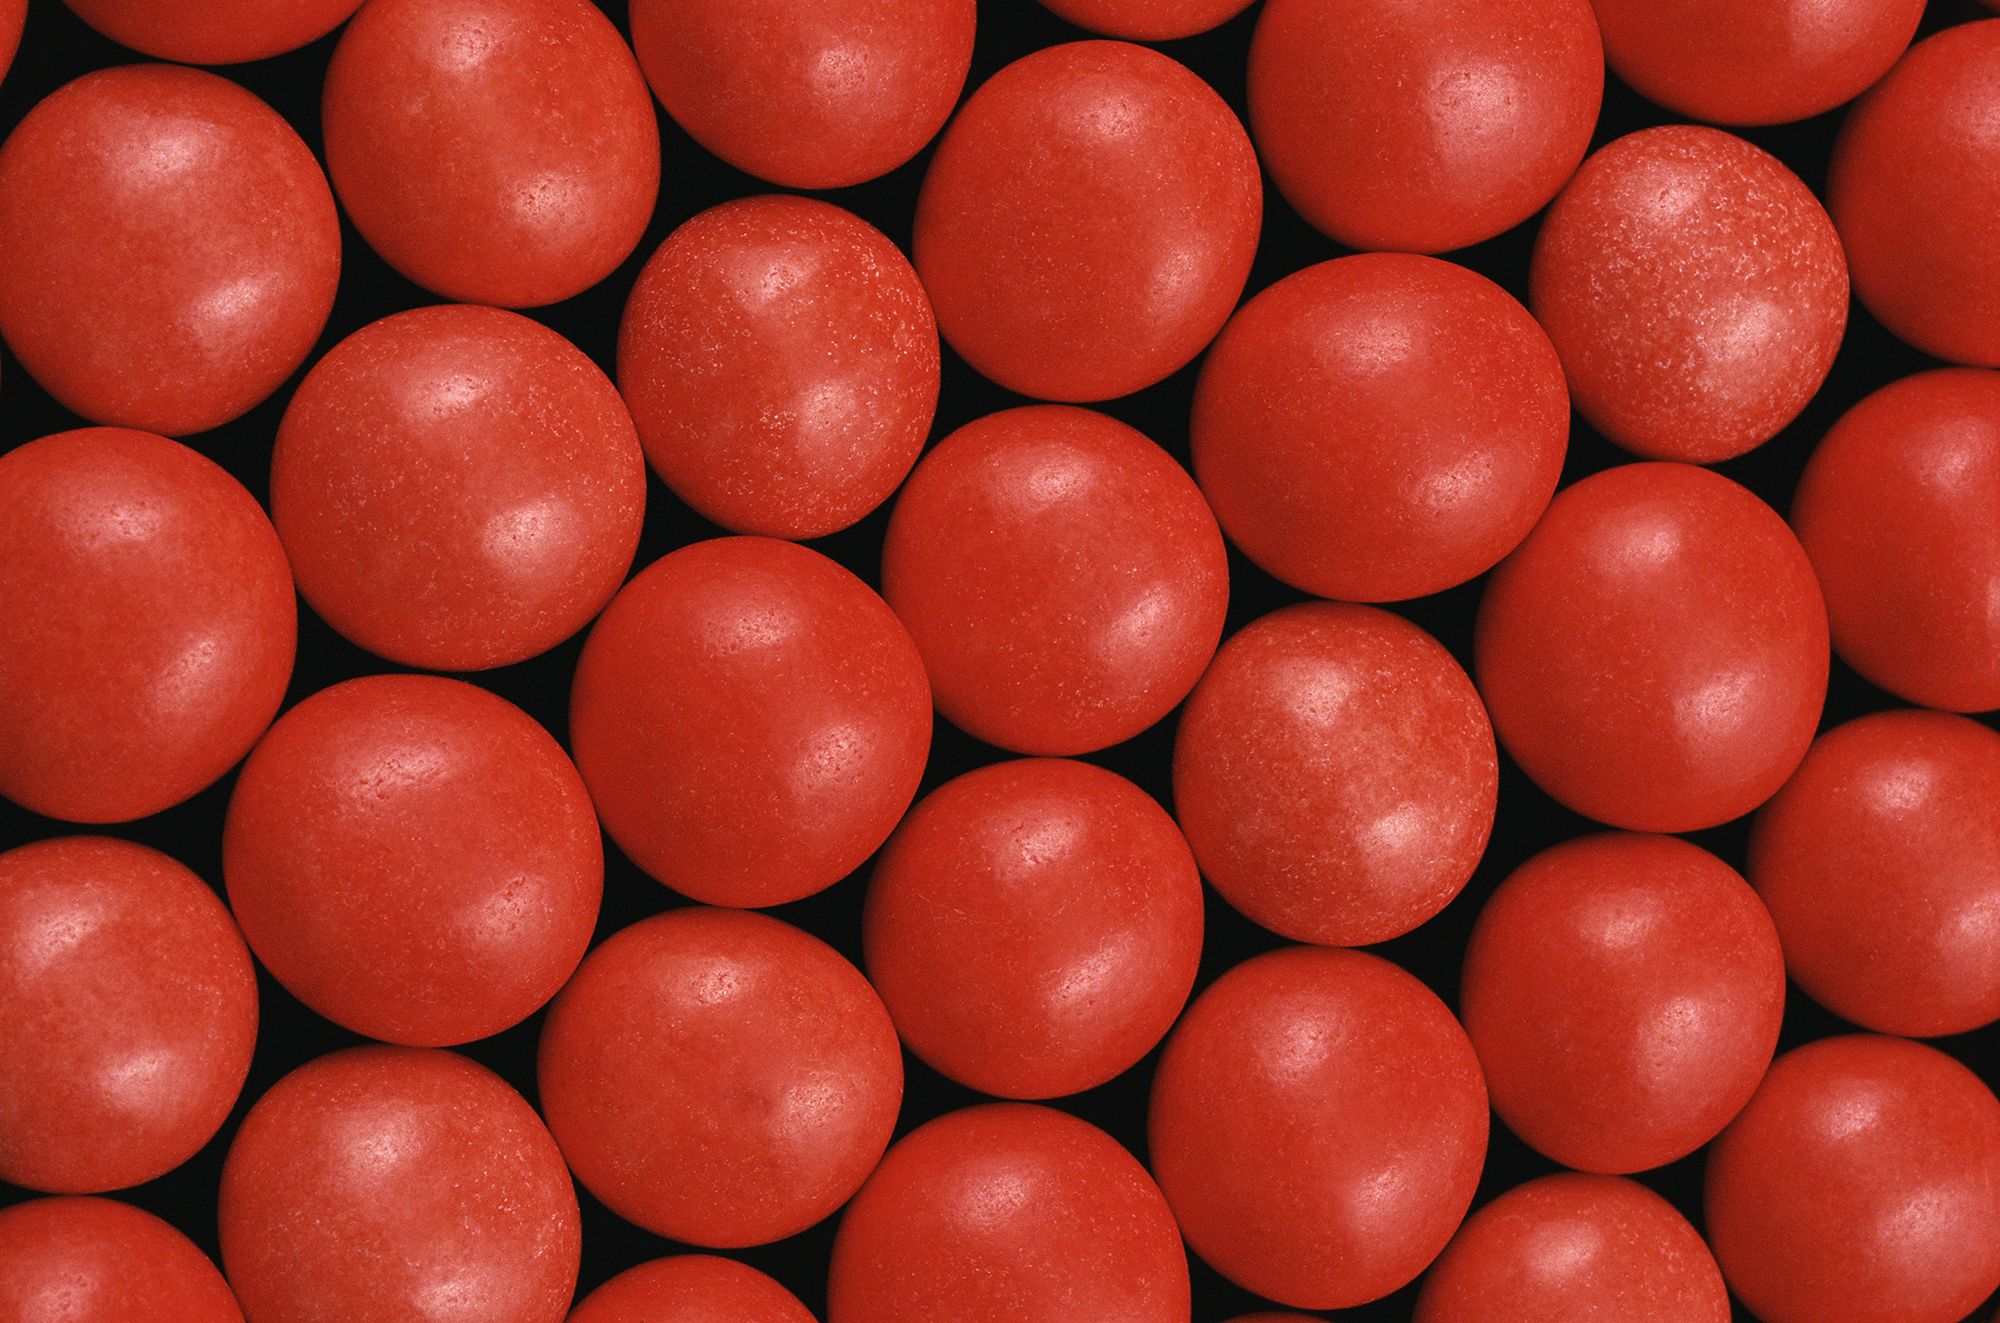 Consumer Reports: Why is red dye still in foods?